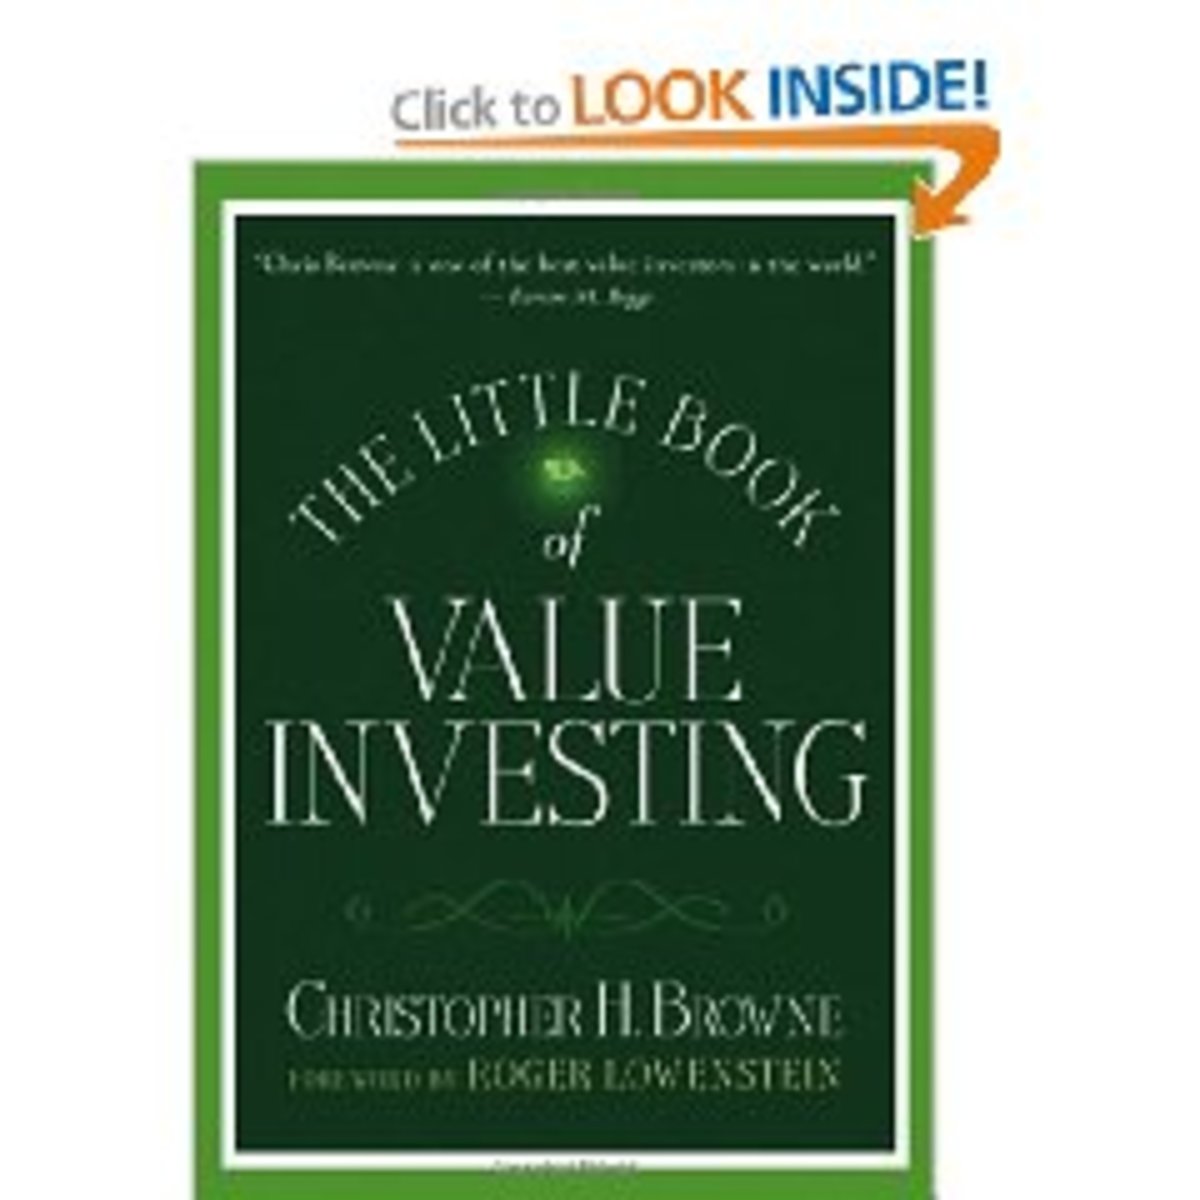 Book Value - Earnings per Share – Price to Earnings Ratio – and Projected Earning Growth